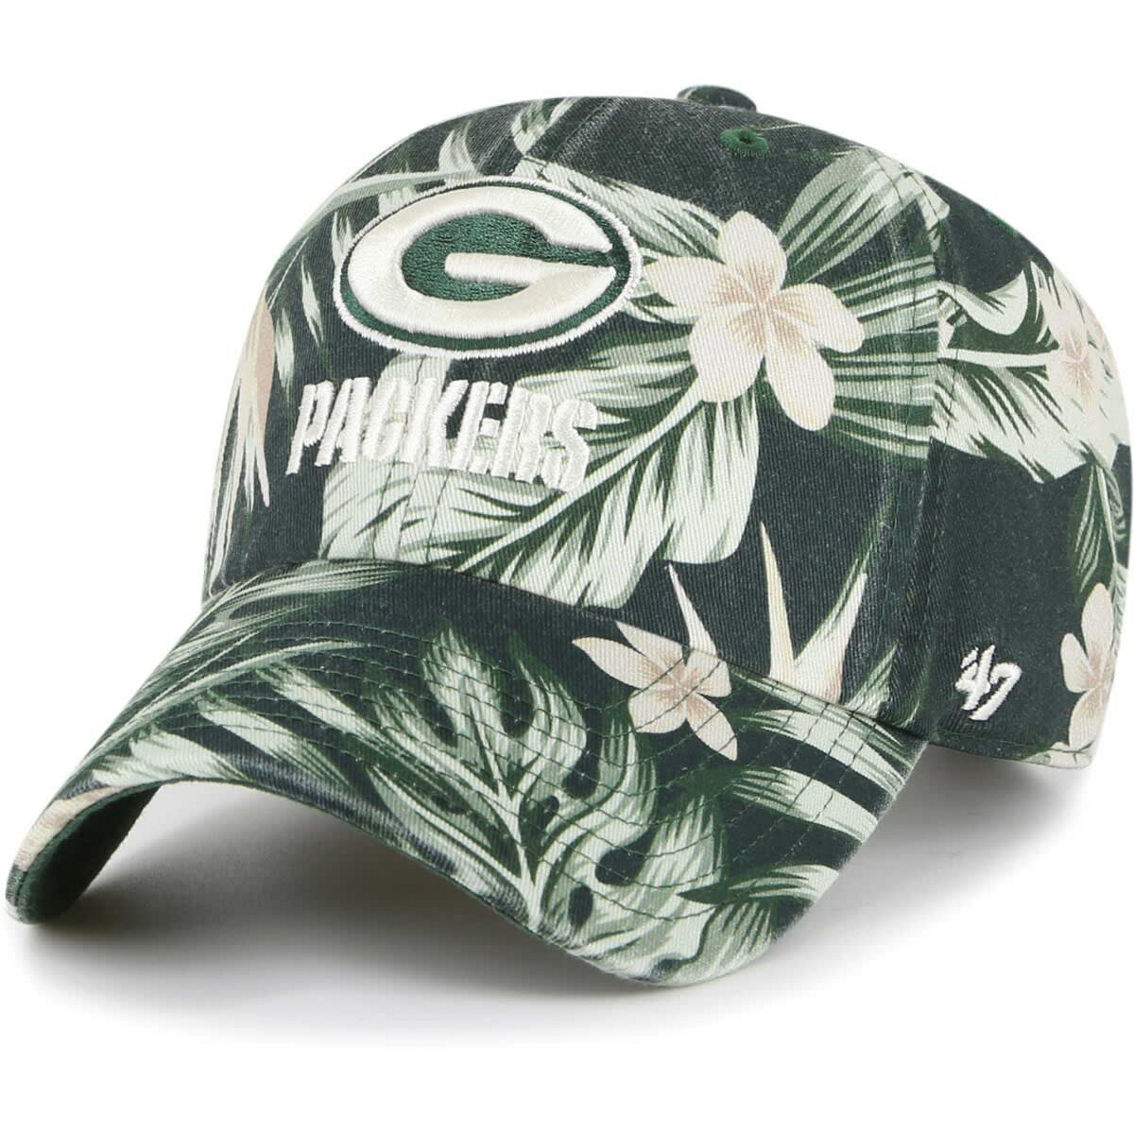 '47 Men's Green Green Bay Packers Tropicalia Clean Up Adjustable Hat - Image 2 of 3